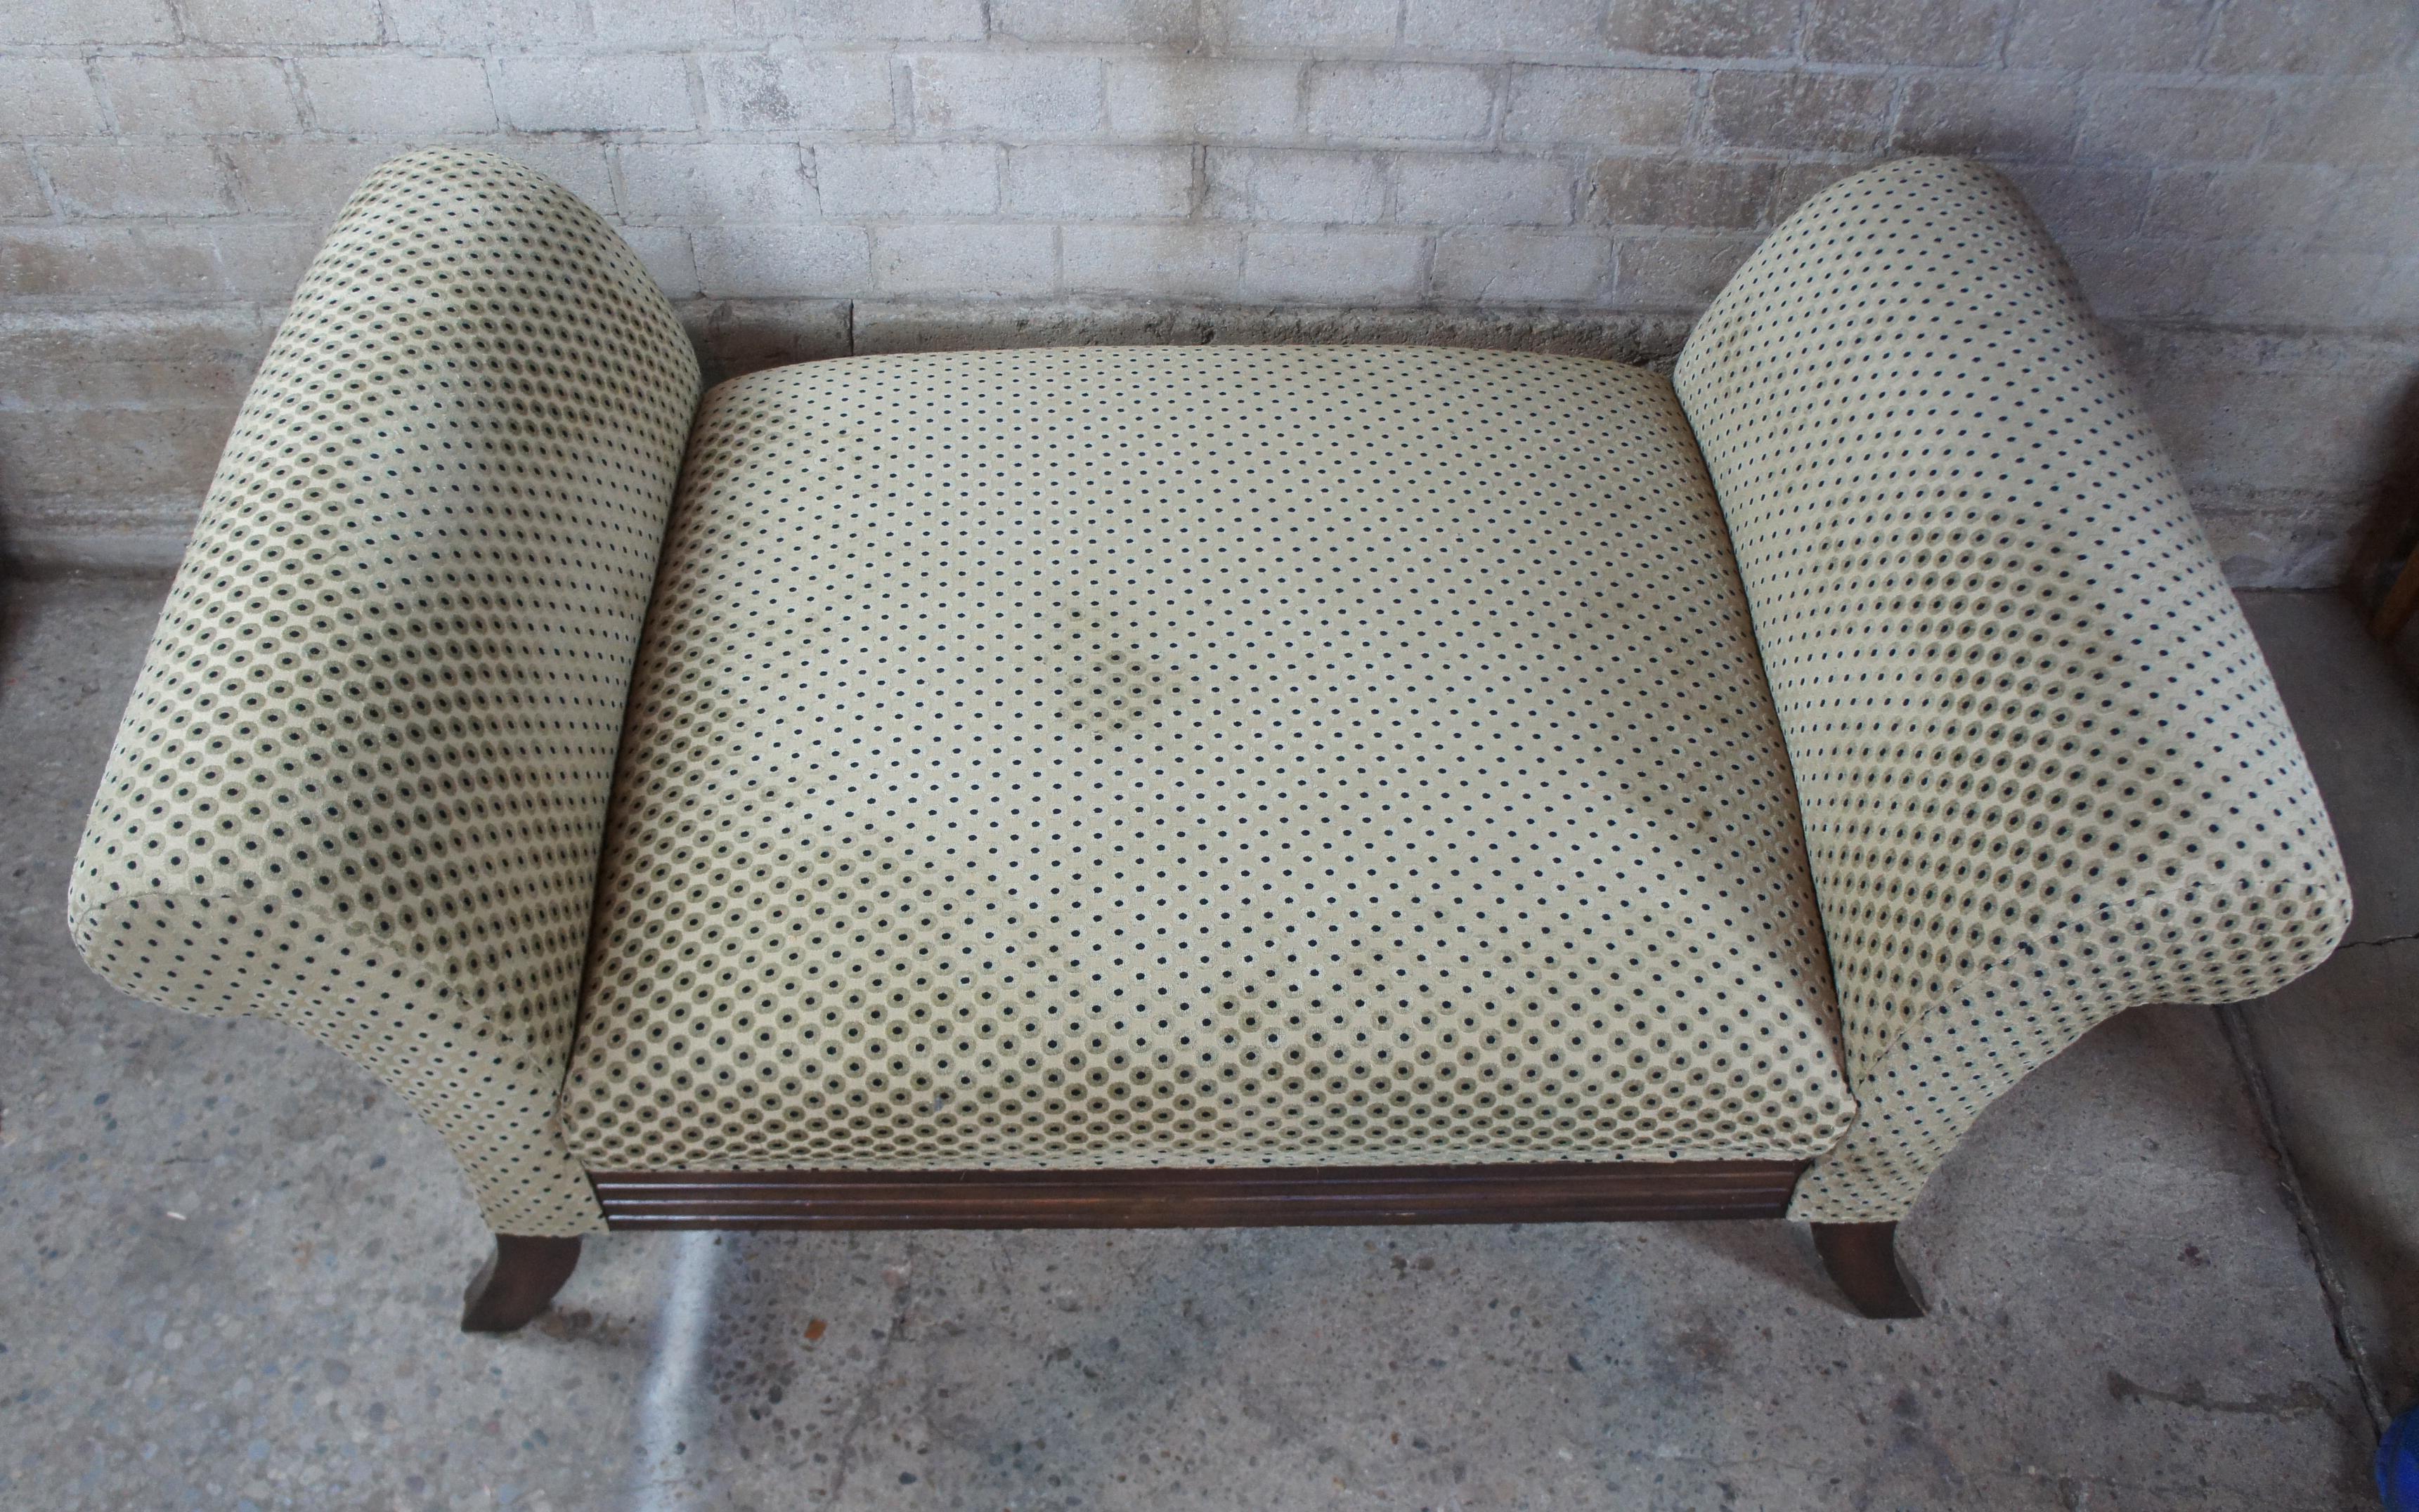 20th Century Traditional Contemporary Polka Dot Upholstered Lounge Day Bed Settee For Sale